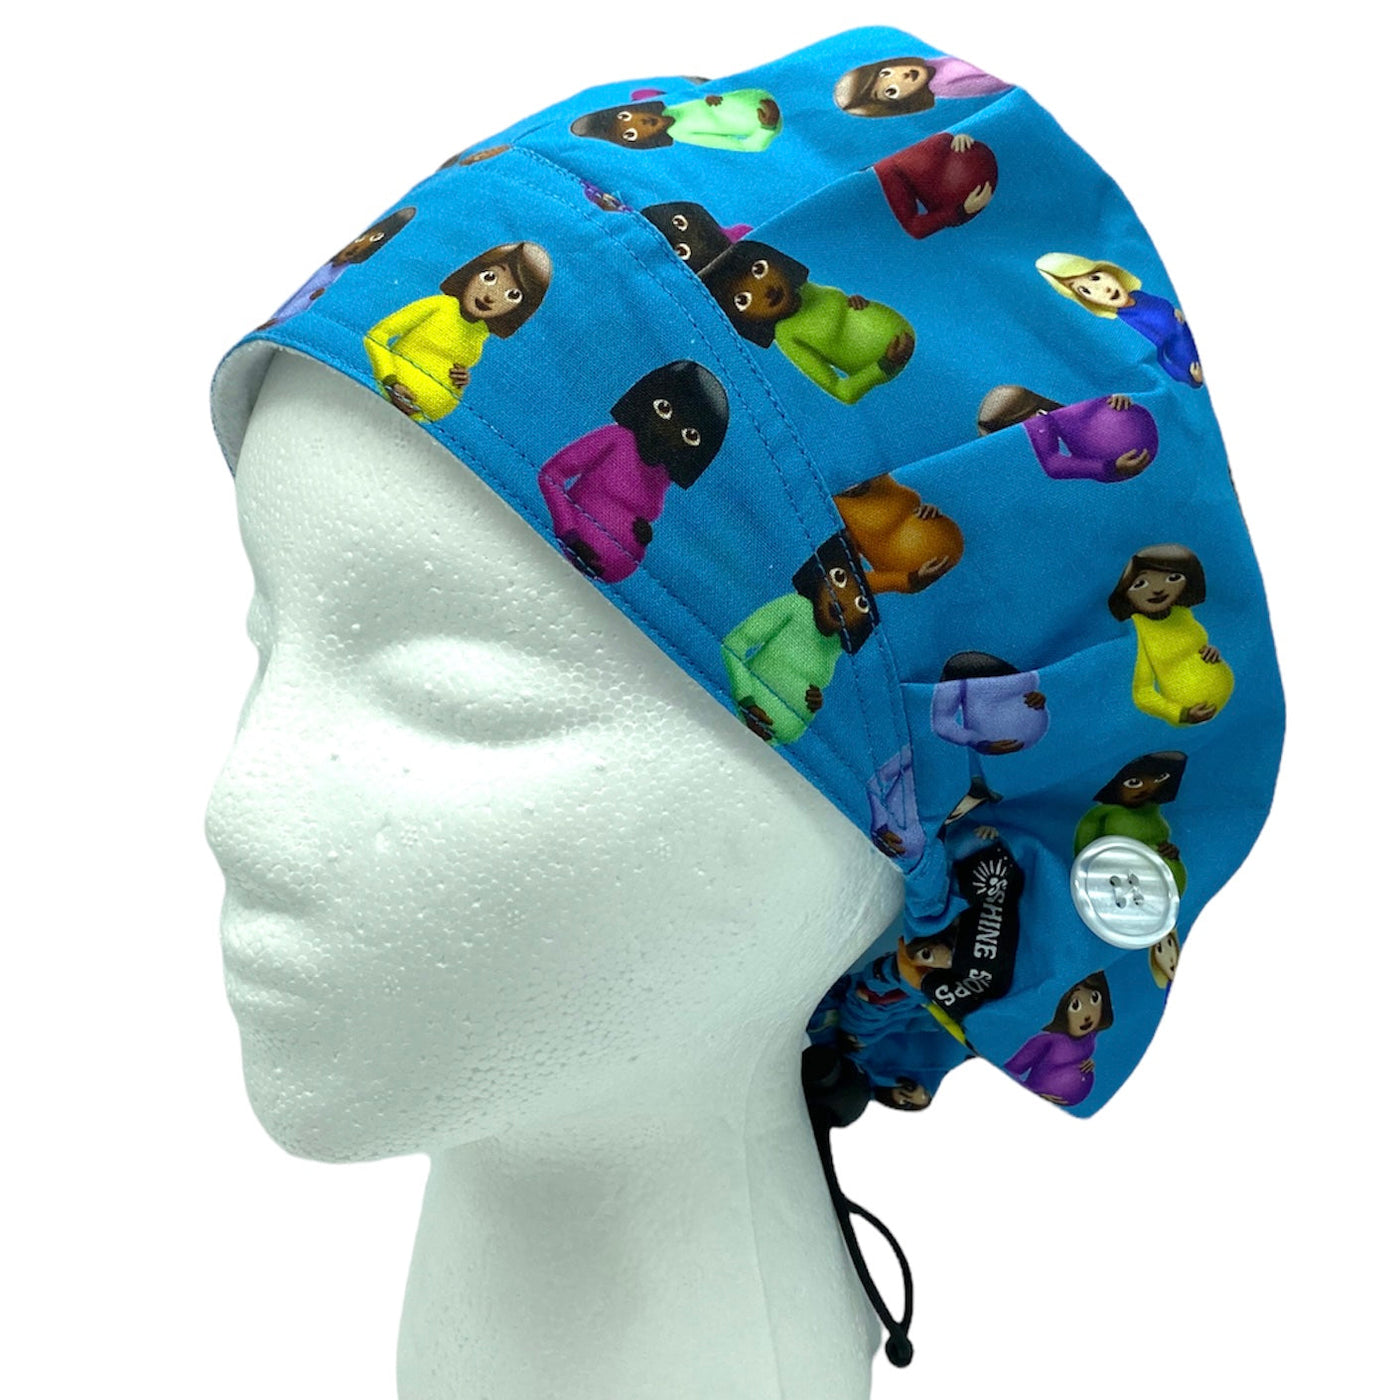 pregnant emoji labor and delivery clb surgical scrub for women with long hair. best scrub hats with buttons and satin lining by sunshine shops co